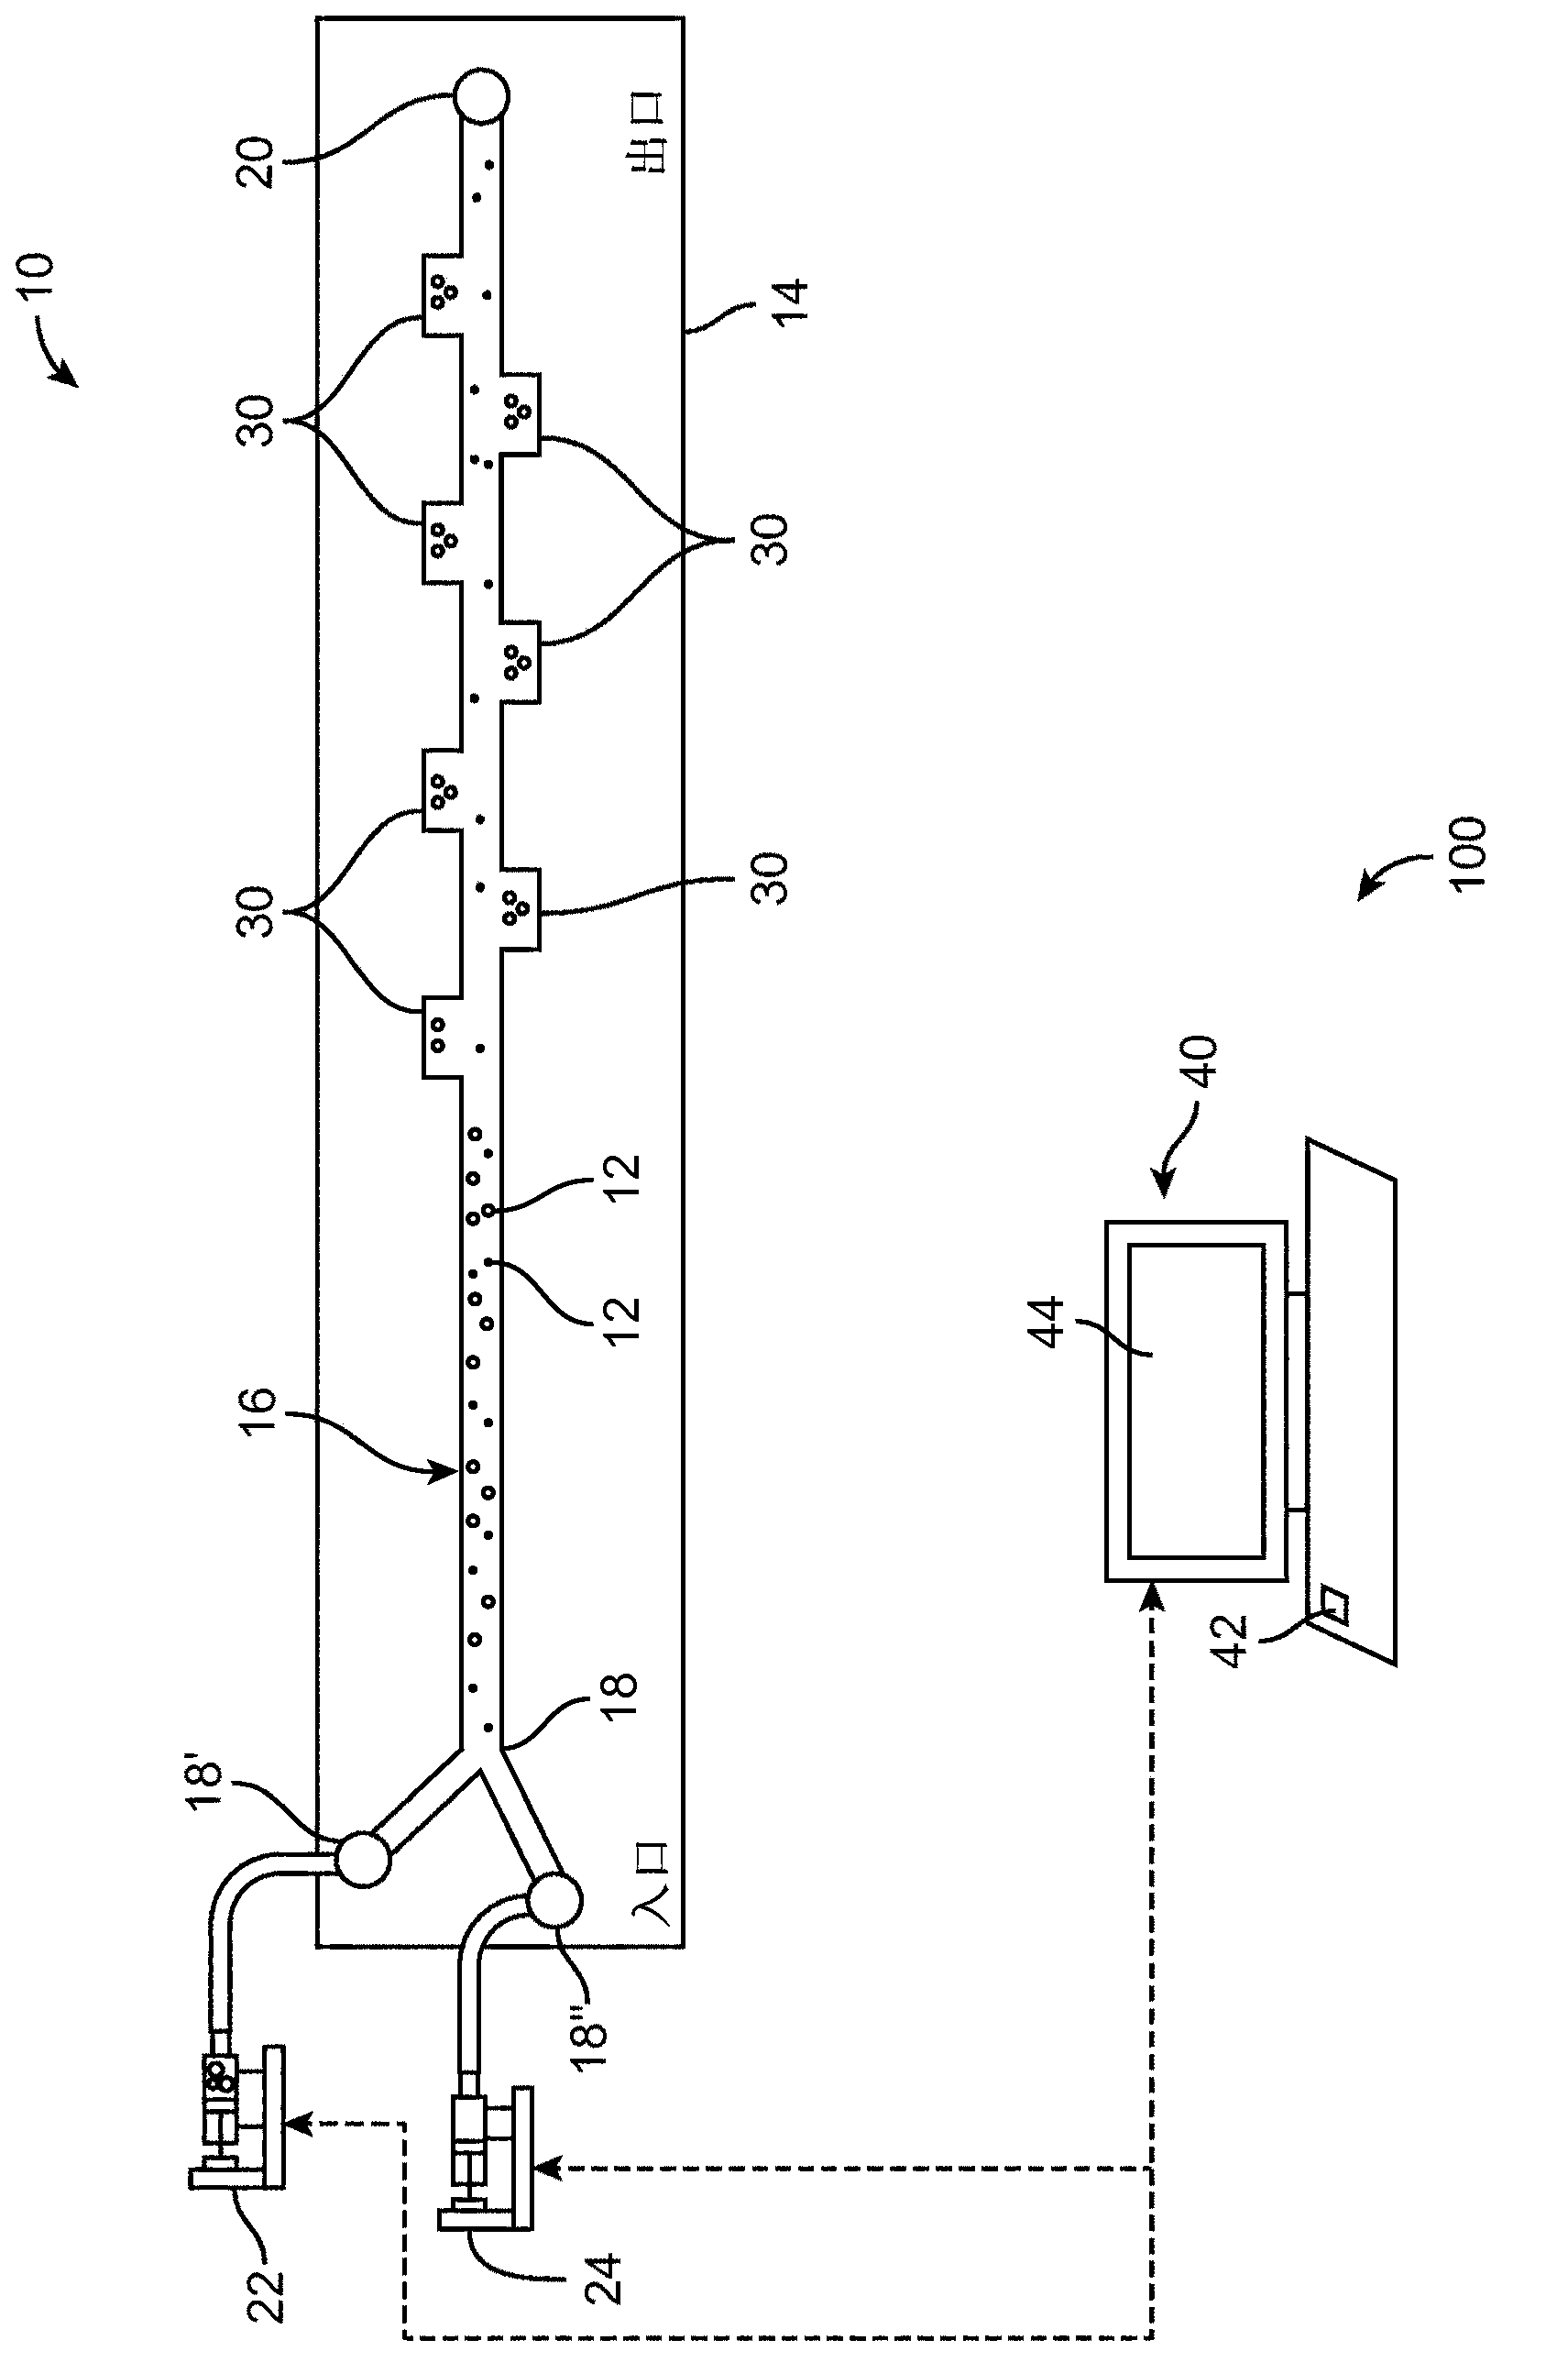 Method and device for isolating cells from heterogeneous solution using microfluidic trapping vortices